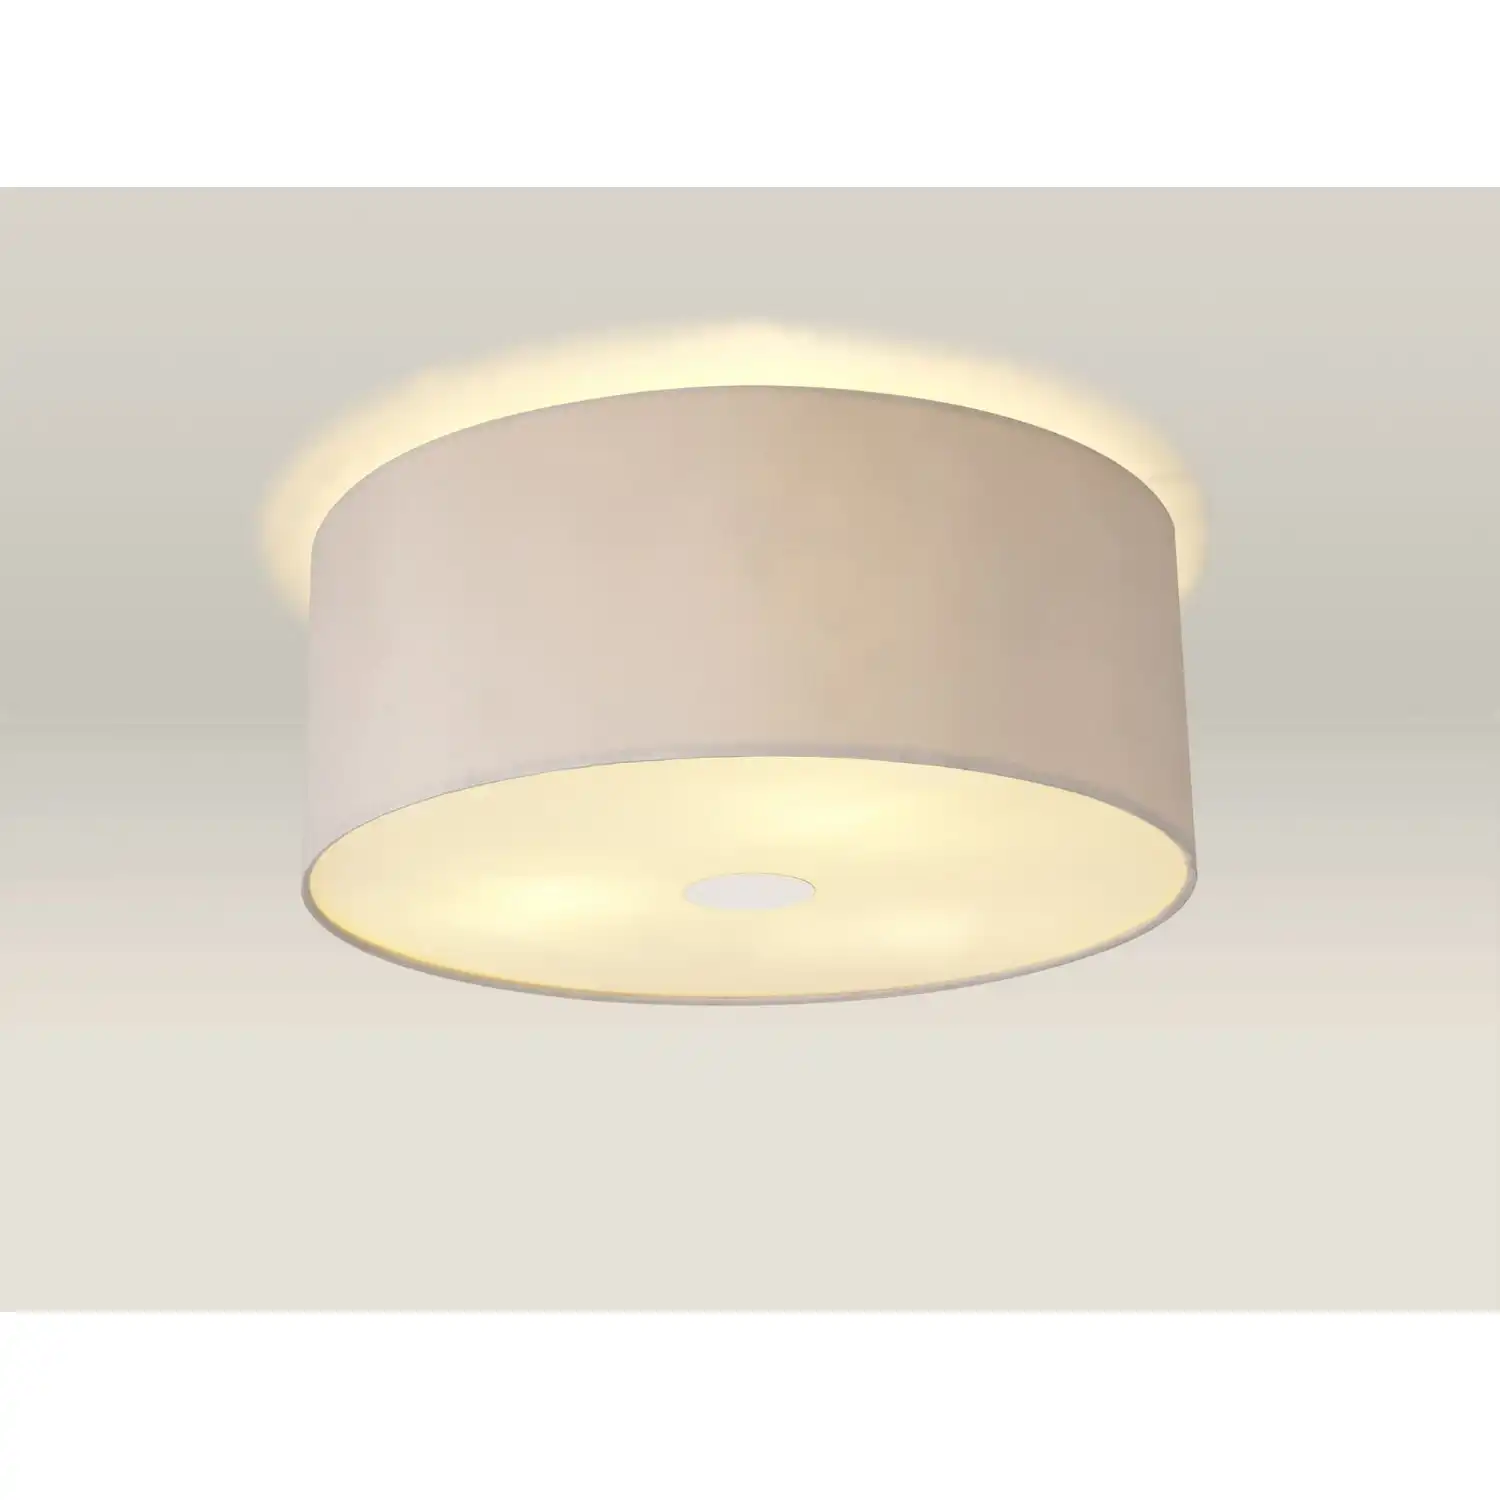 Baymont Polished Chrome 3 Light E27 Drop Flush Ceiling c w 500 Dual Faux Silk Fabric Shade Nude Beige Moonlight And 500mm Frosted PC Acrylic Diffuser